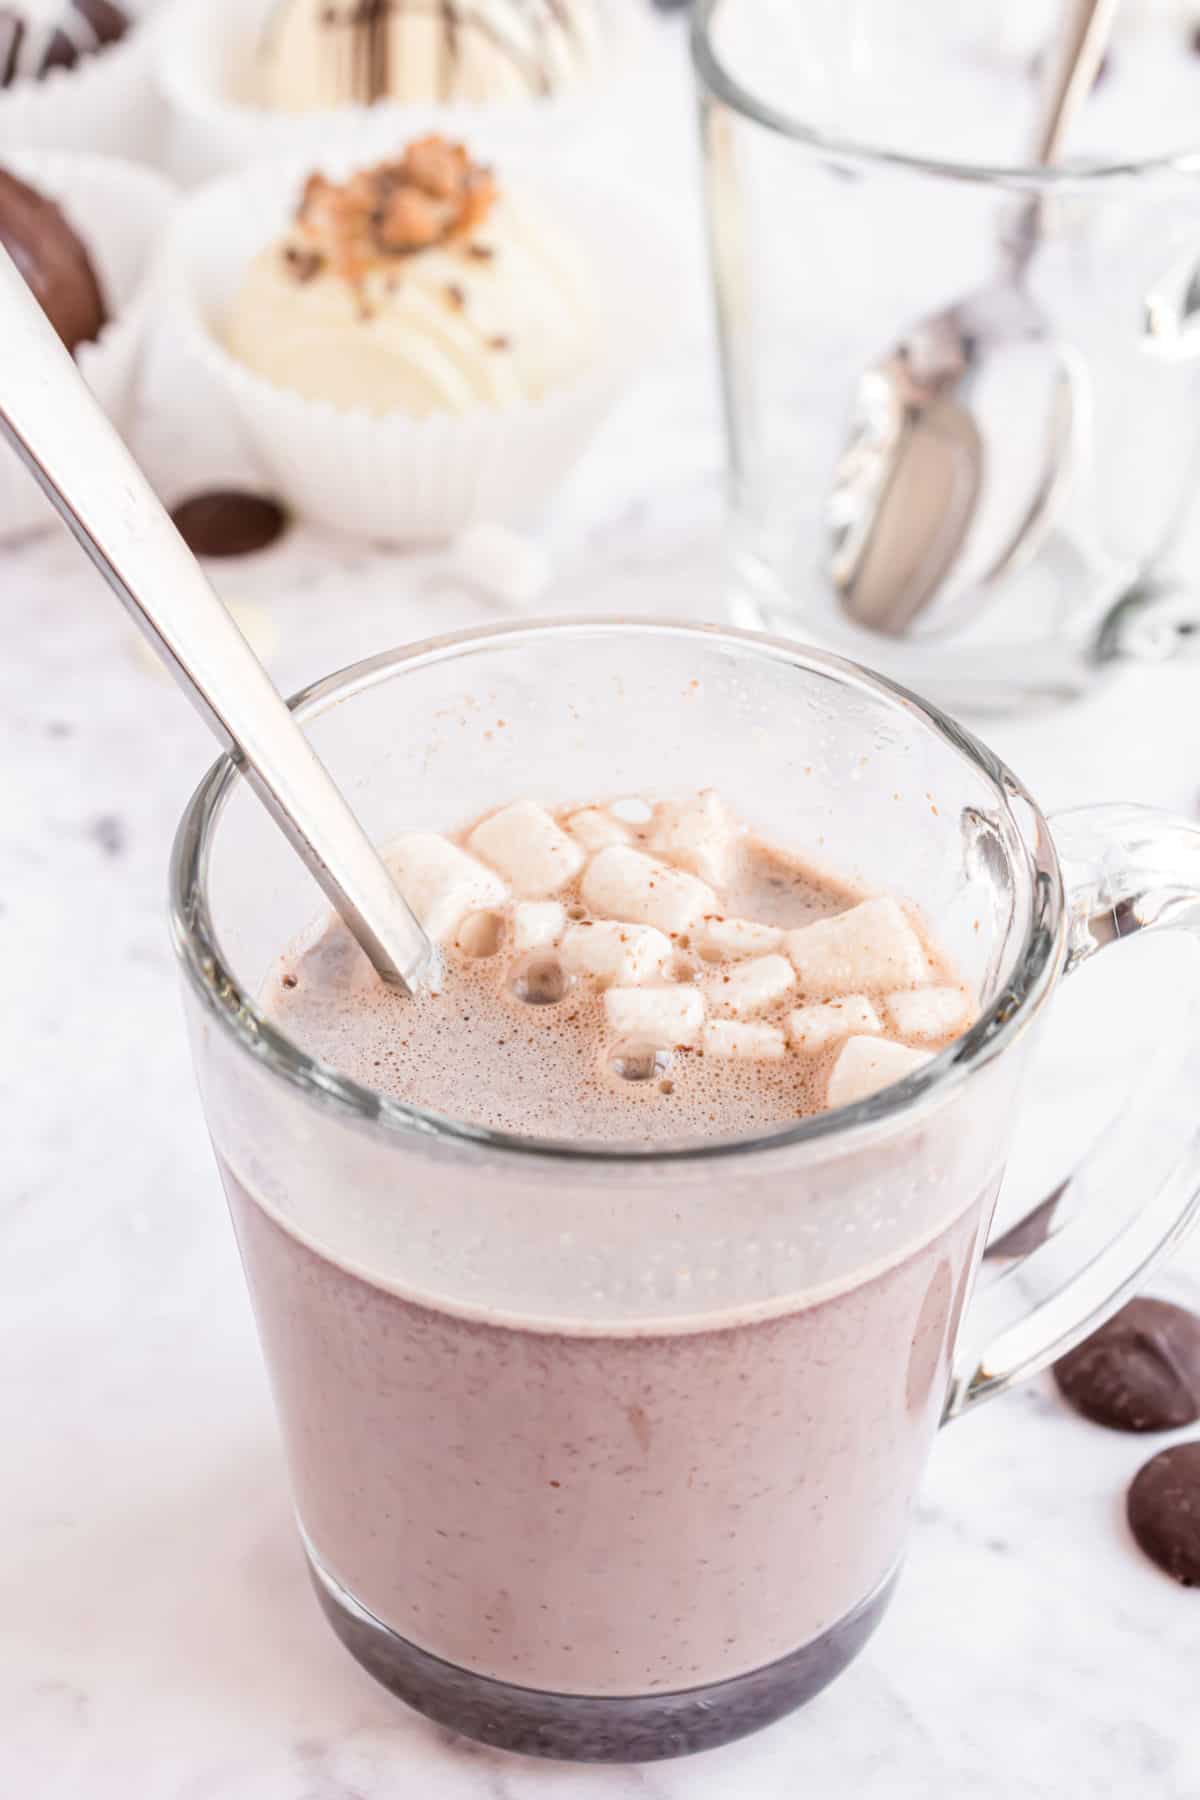 Hot cocoa bomb with marshmallows dissolved in clear mug of warm milk.